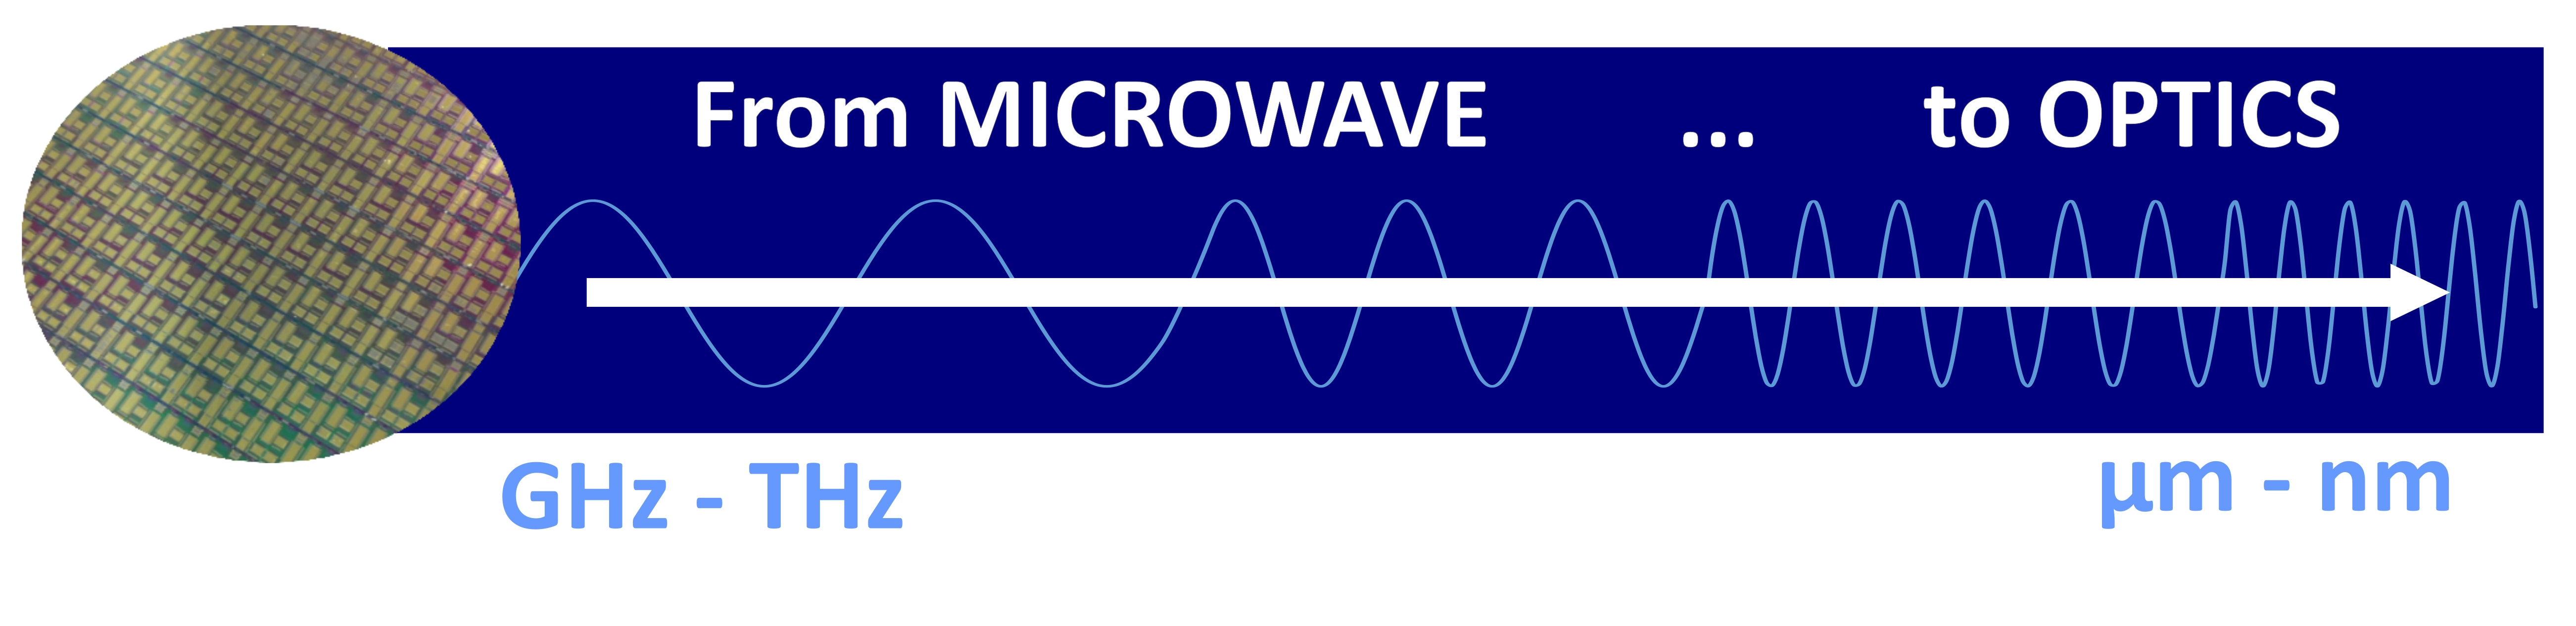 From microwave (GHz to THz) to optics (µm to nm) a complete set of components fabricated on wafer